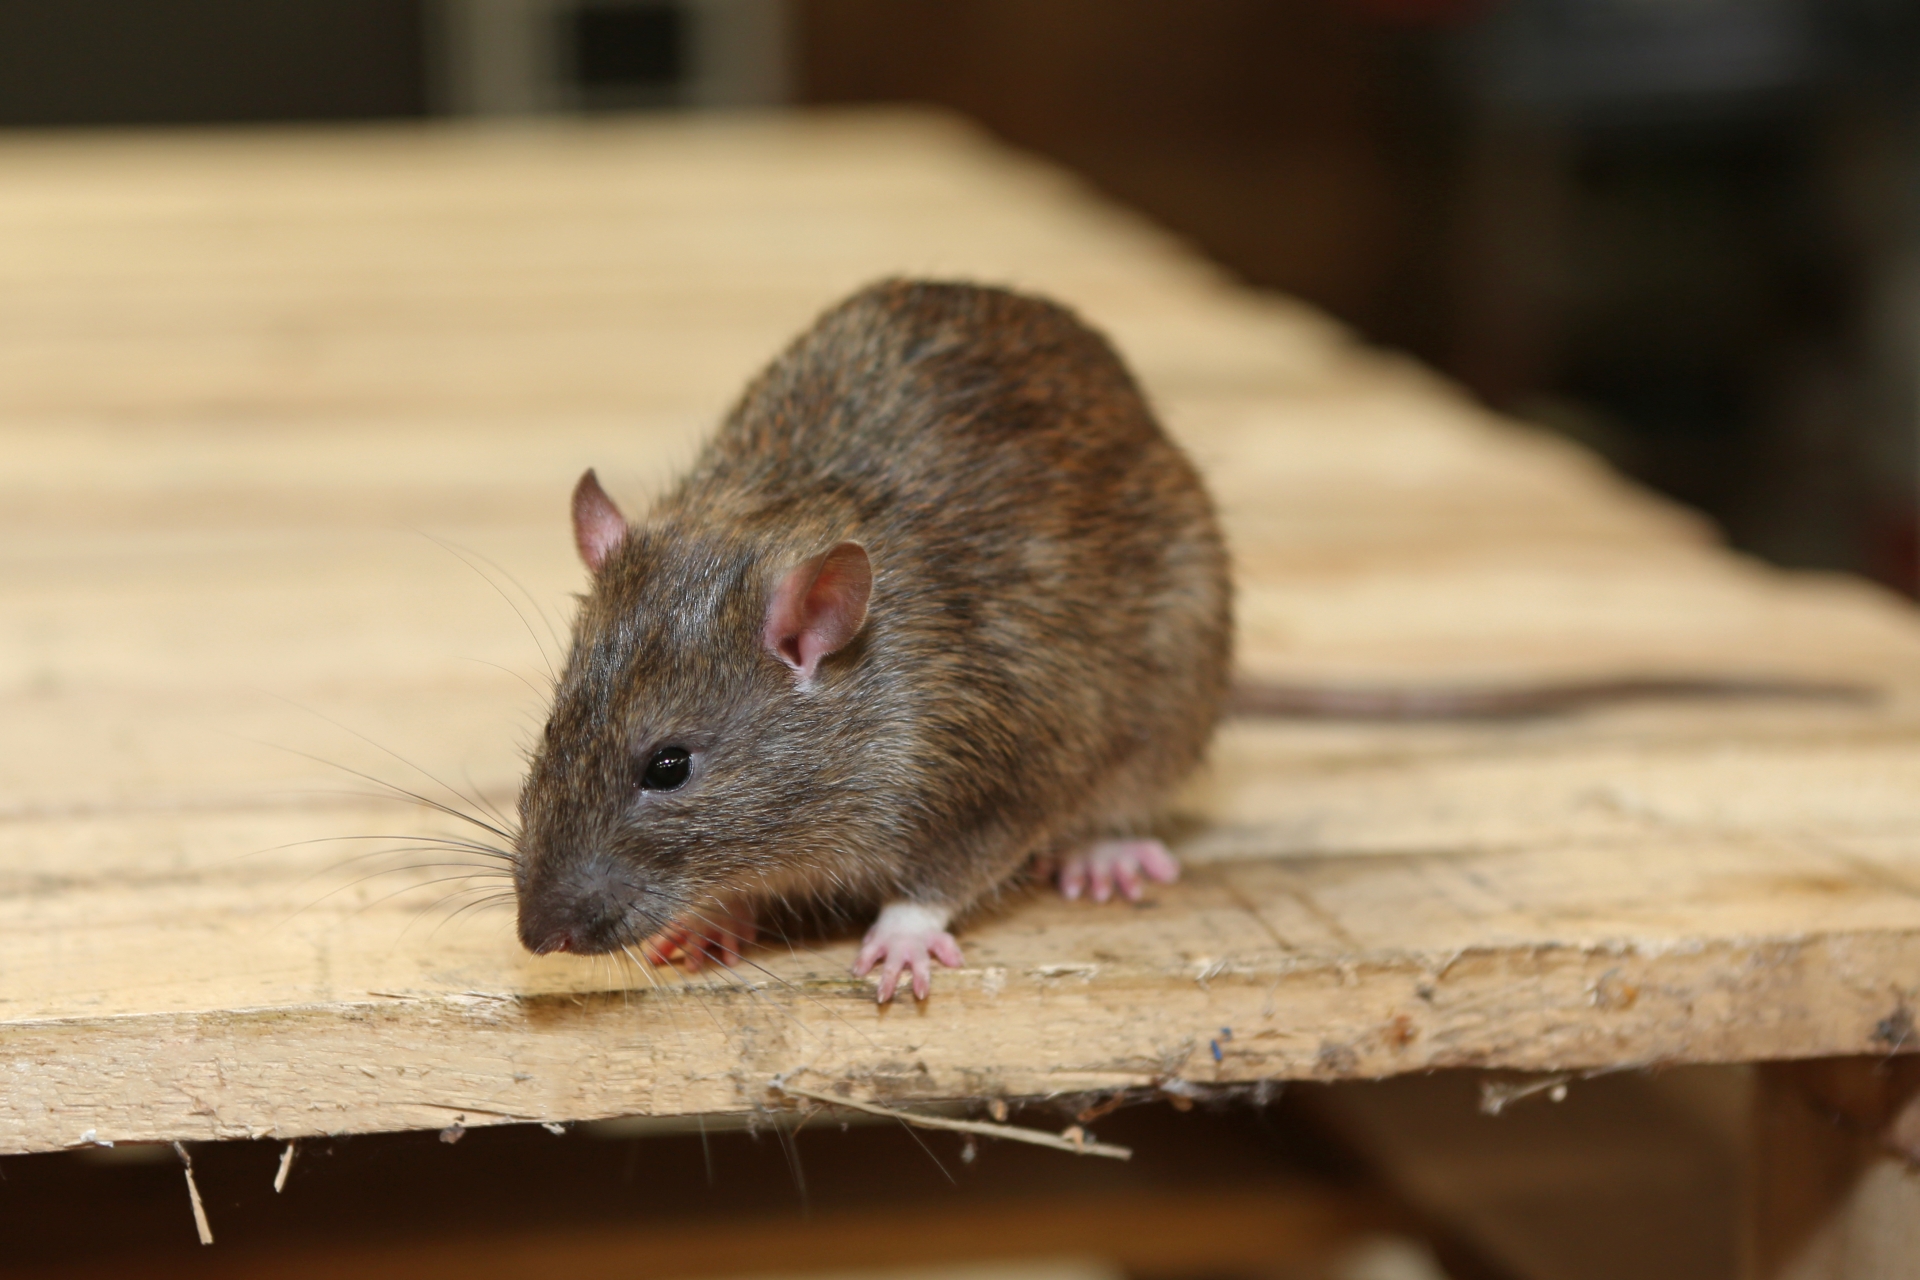 Rat extermination, Pest Control in Hanwell, W7. Call Now 020 8166 9746